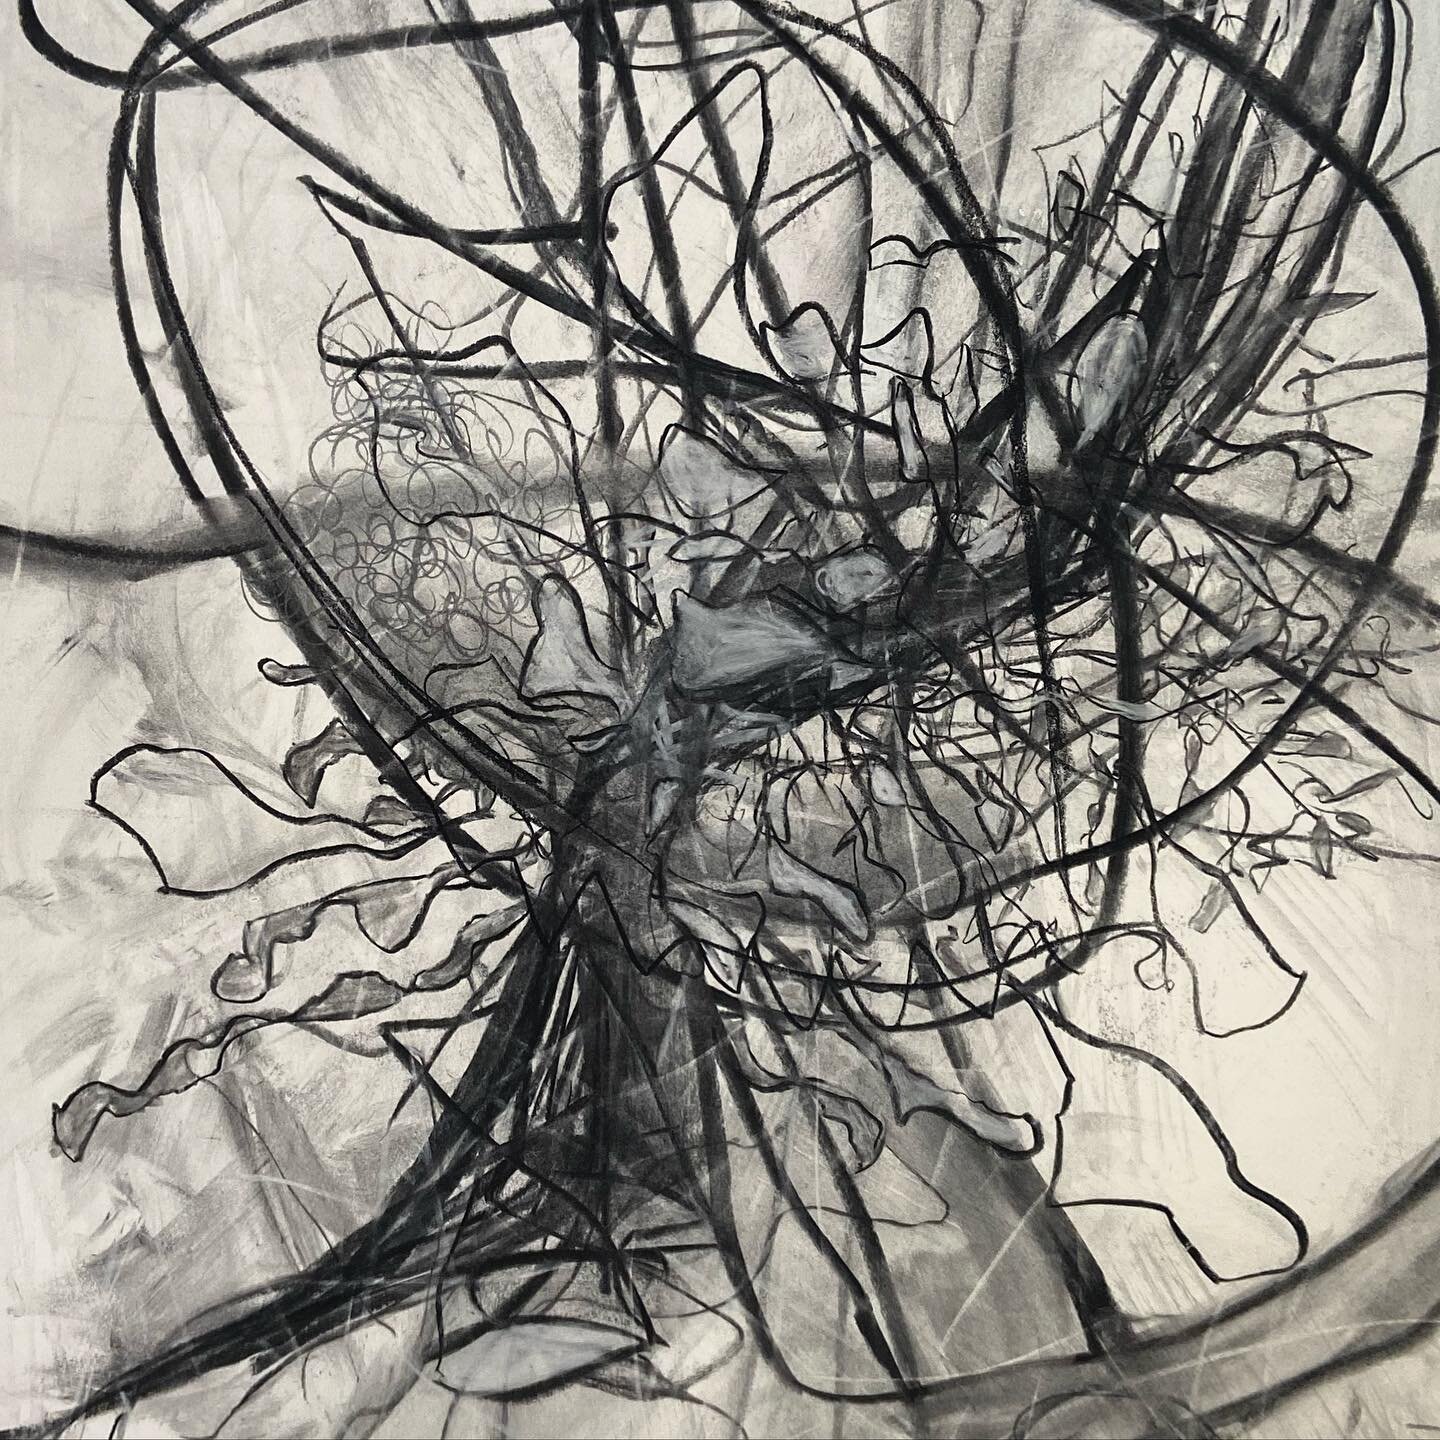 Reigniting my love for charcoal this week. Love how fast and messy and layered it can be. #charcoaldrawing #abstractdrawing #coloradoartist